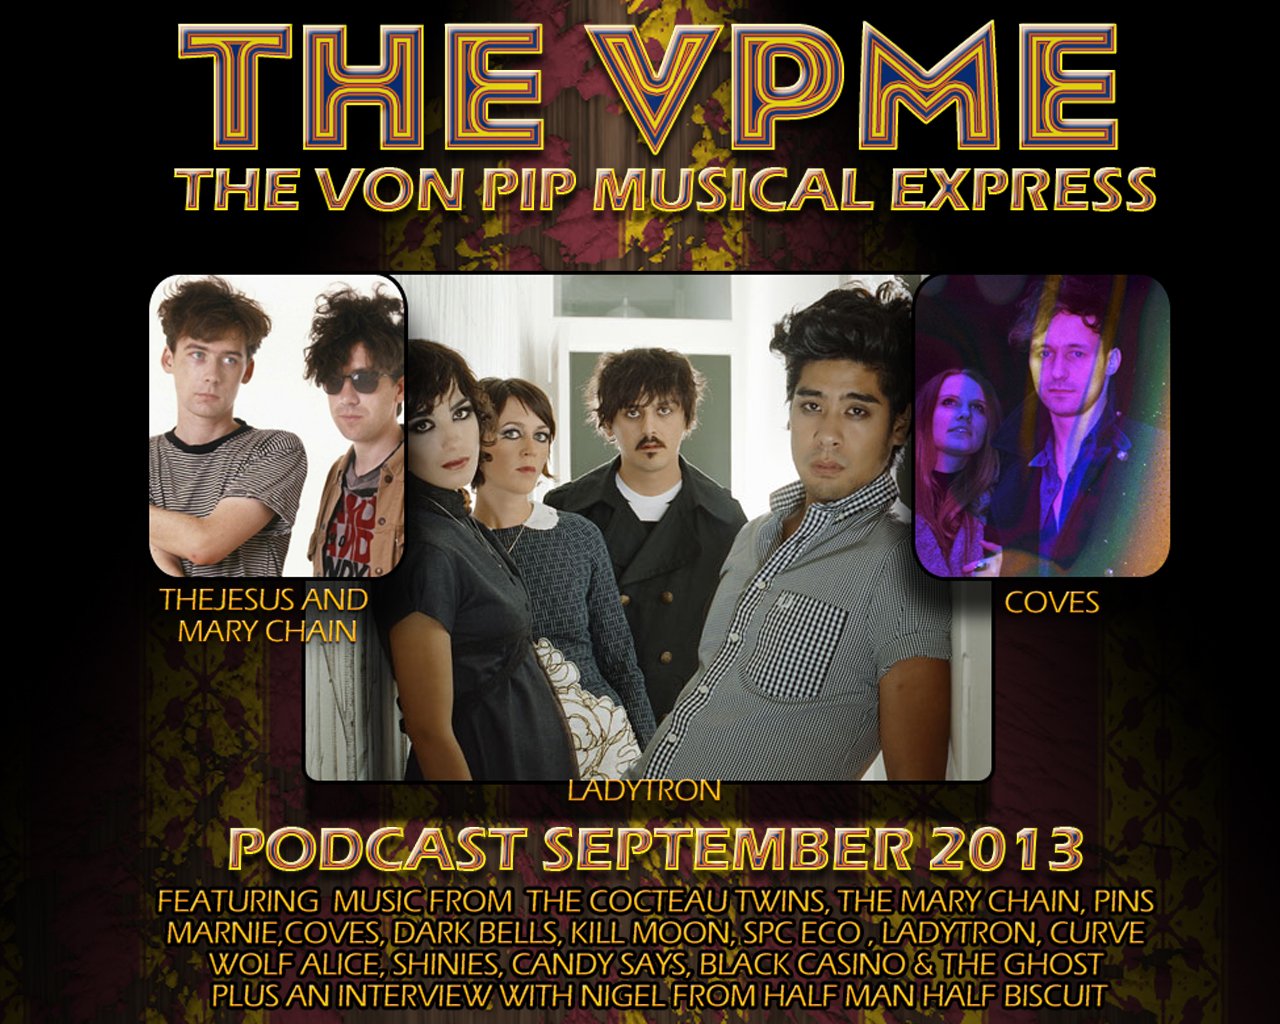 The VPME | The Von Pip Musical Express Podcast - September 2013